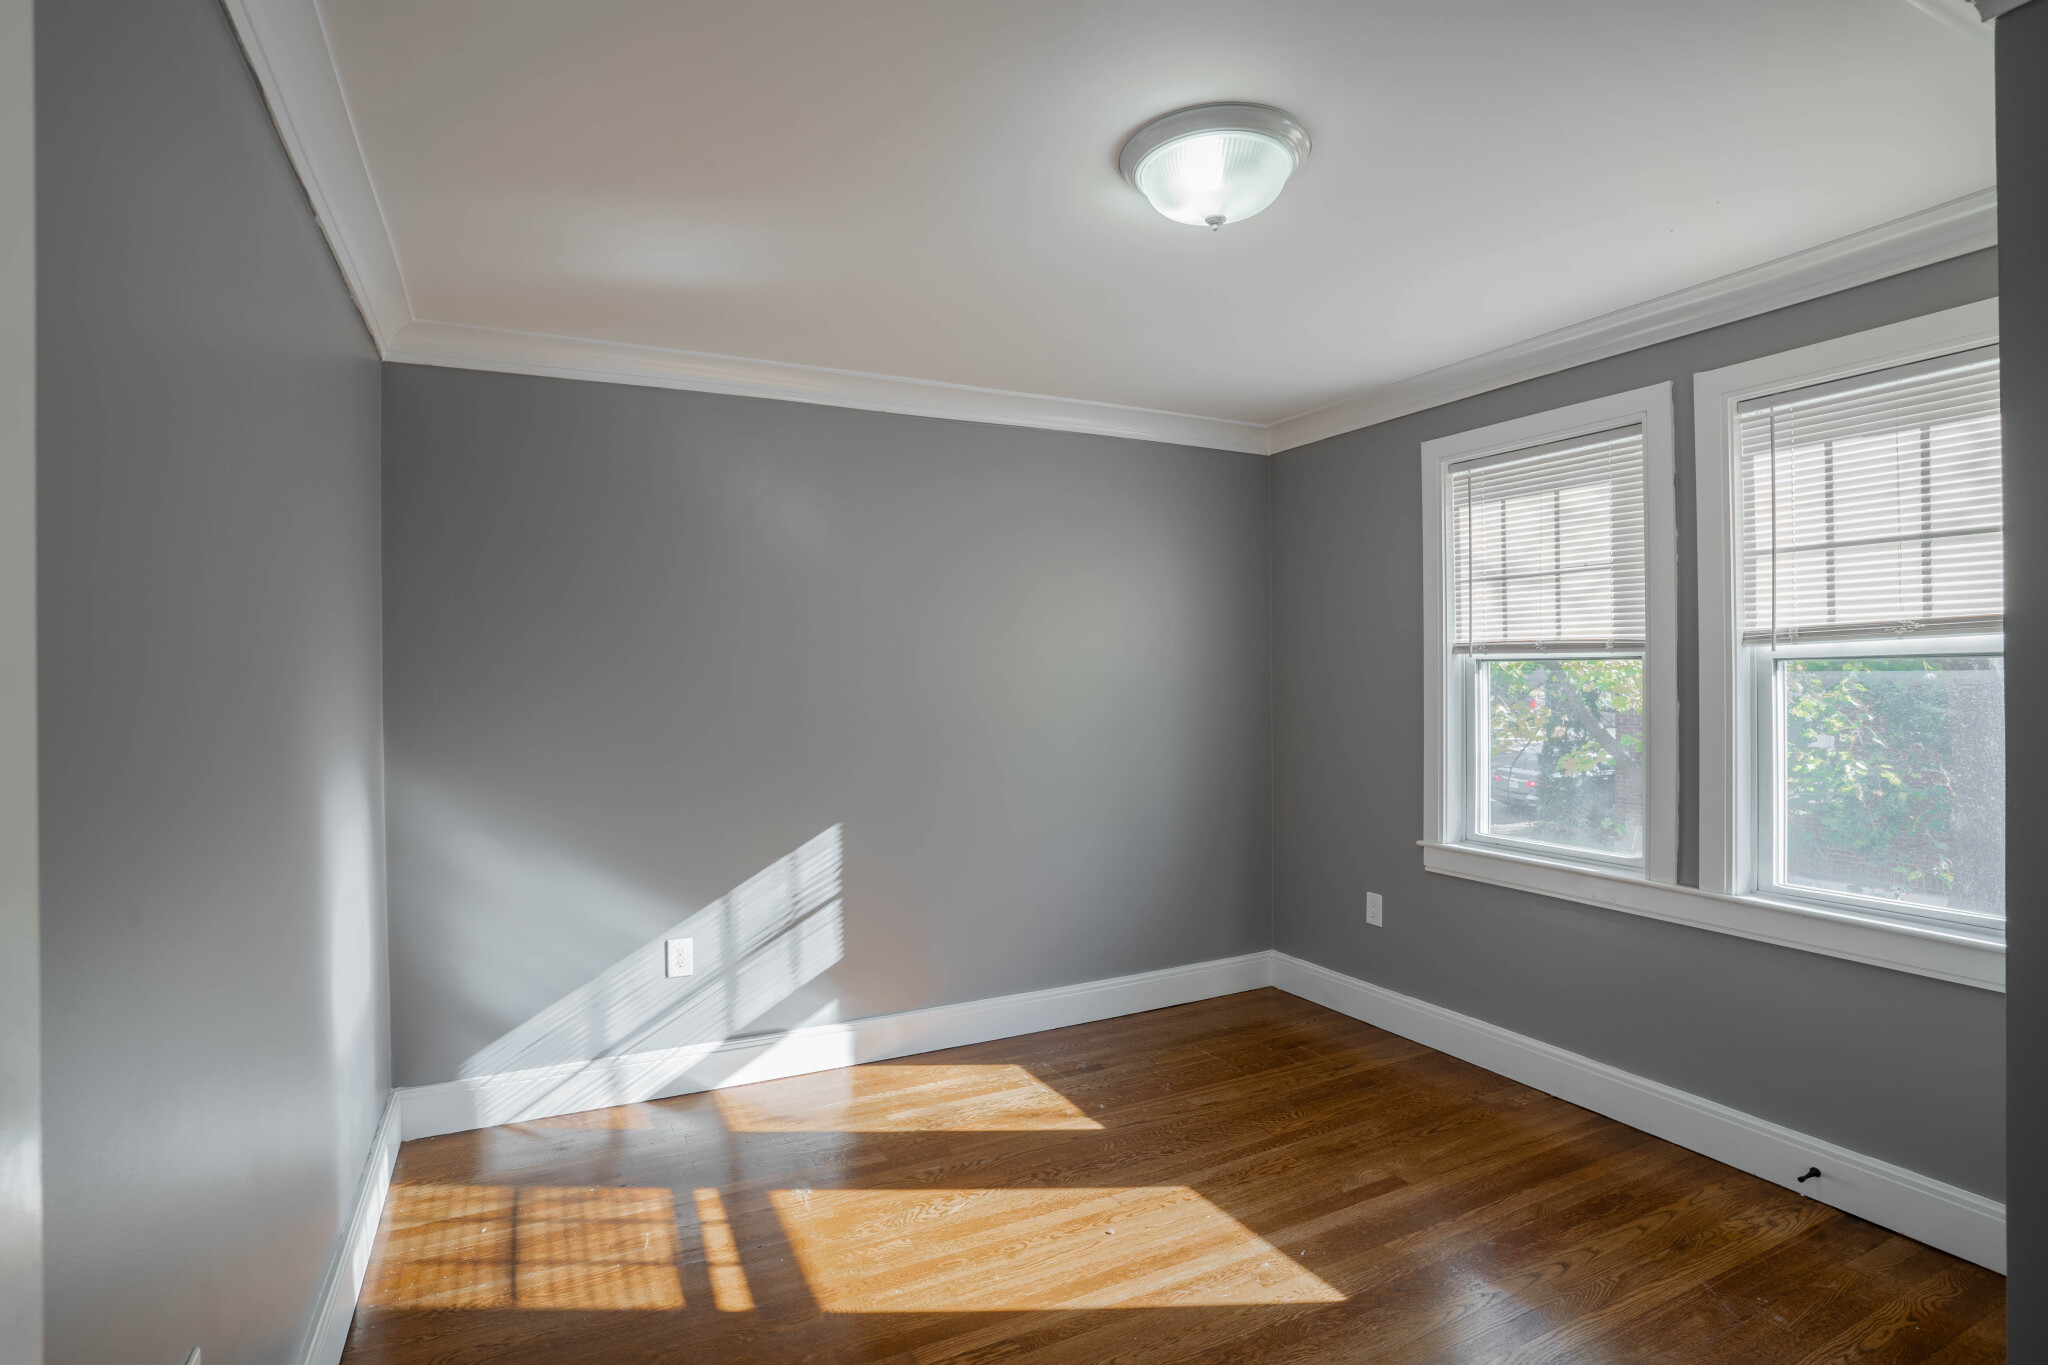 Photos of apartment on Nottinghill Rd.,Boston MA 02135